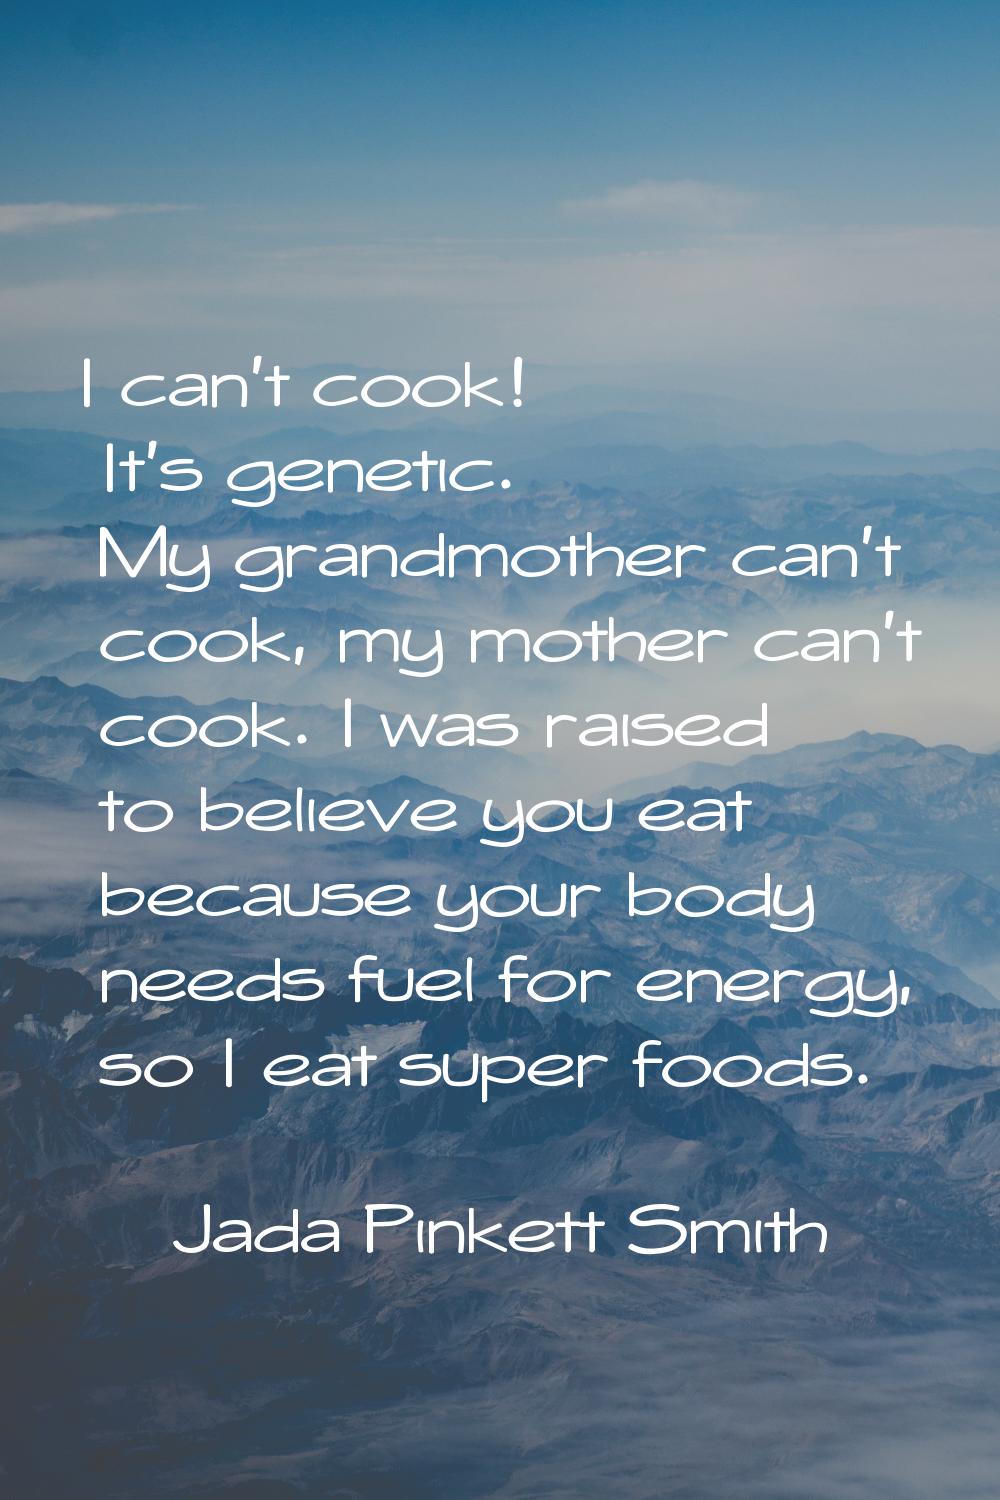 I can't cook! It's genetic. My grandmother can't cook, my mother can't cook. I was raised to believ